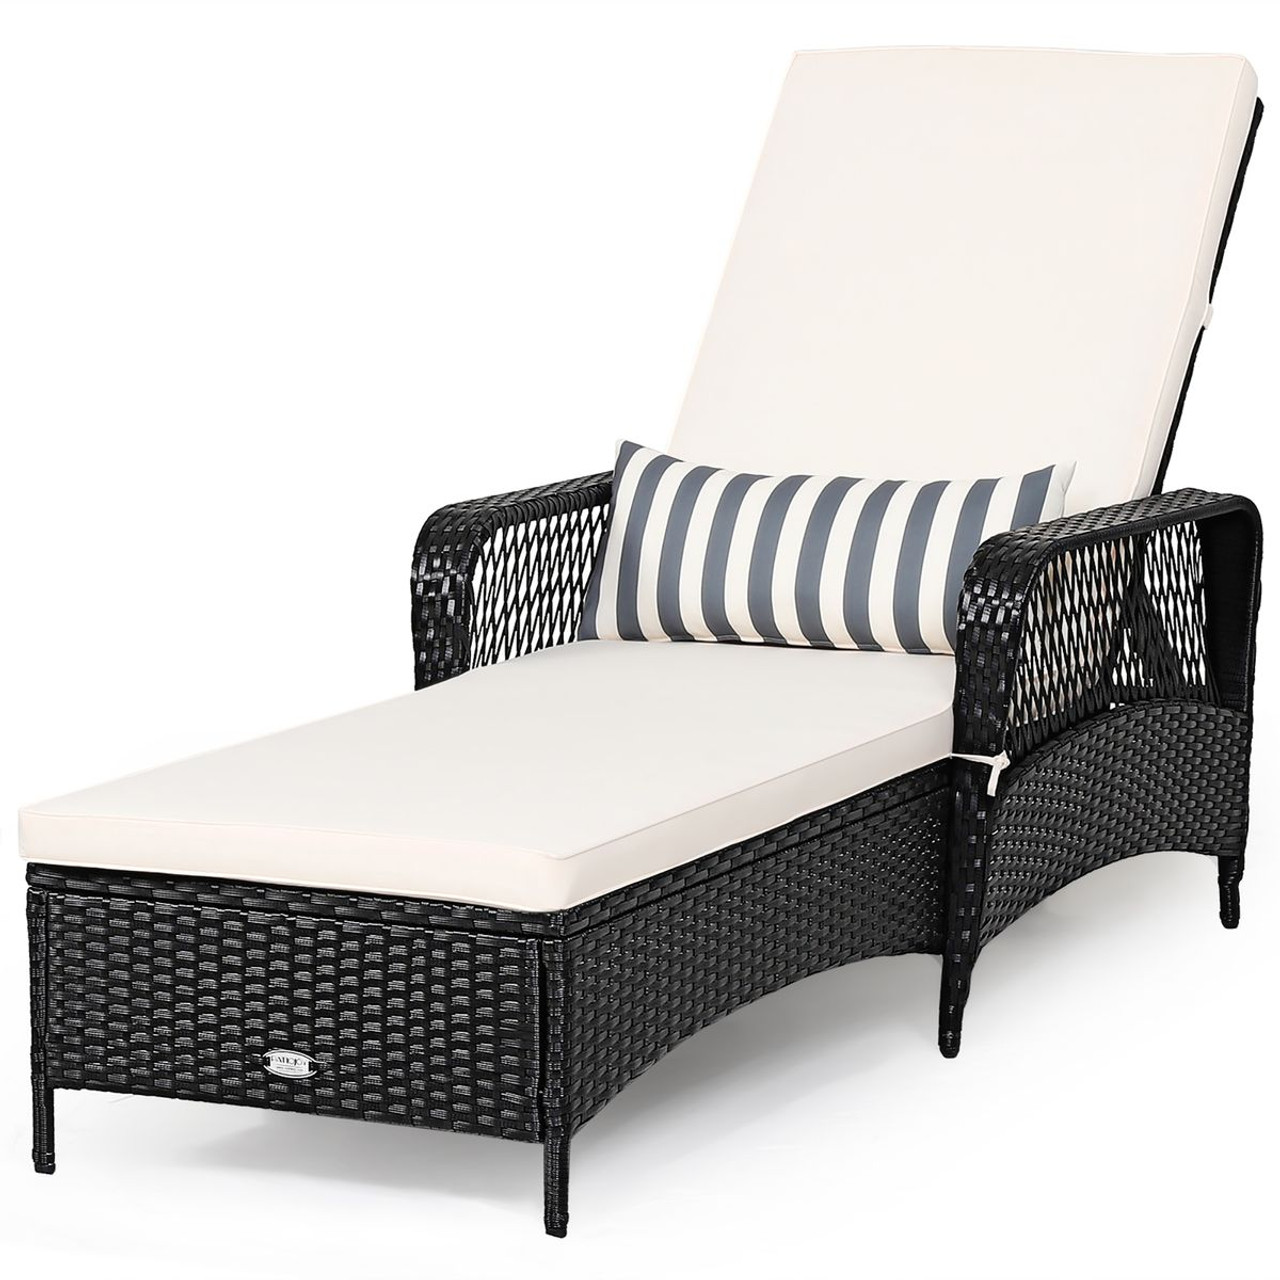 Patio Wicker Chaise Lounge Chair with Pillow and Adjustable Backrest product image